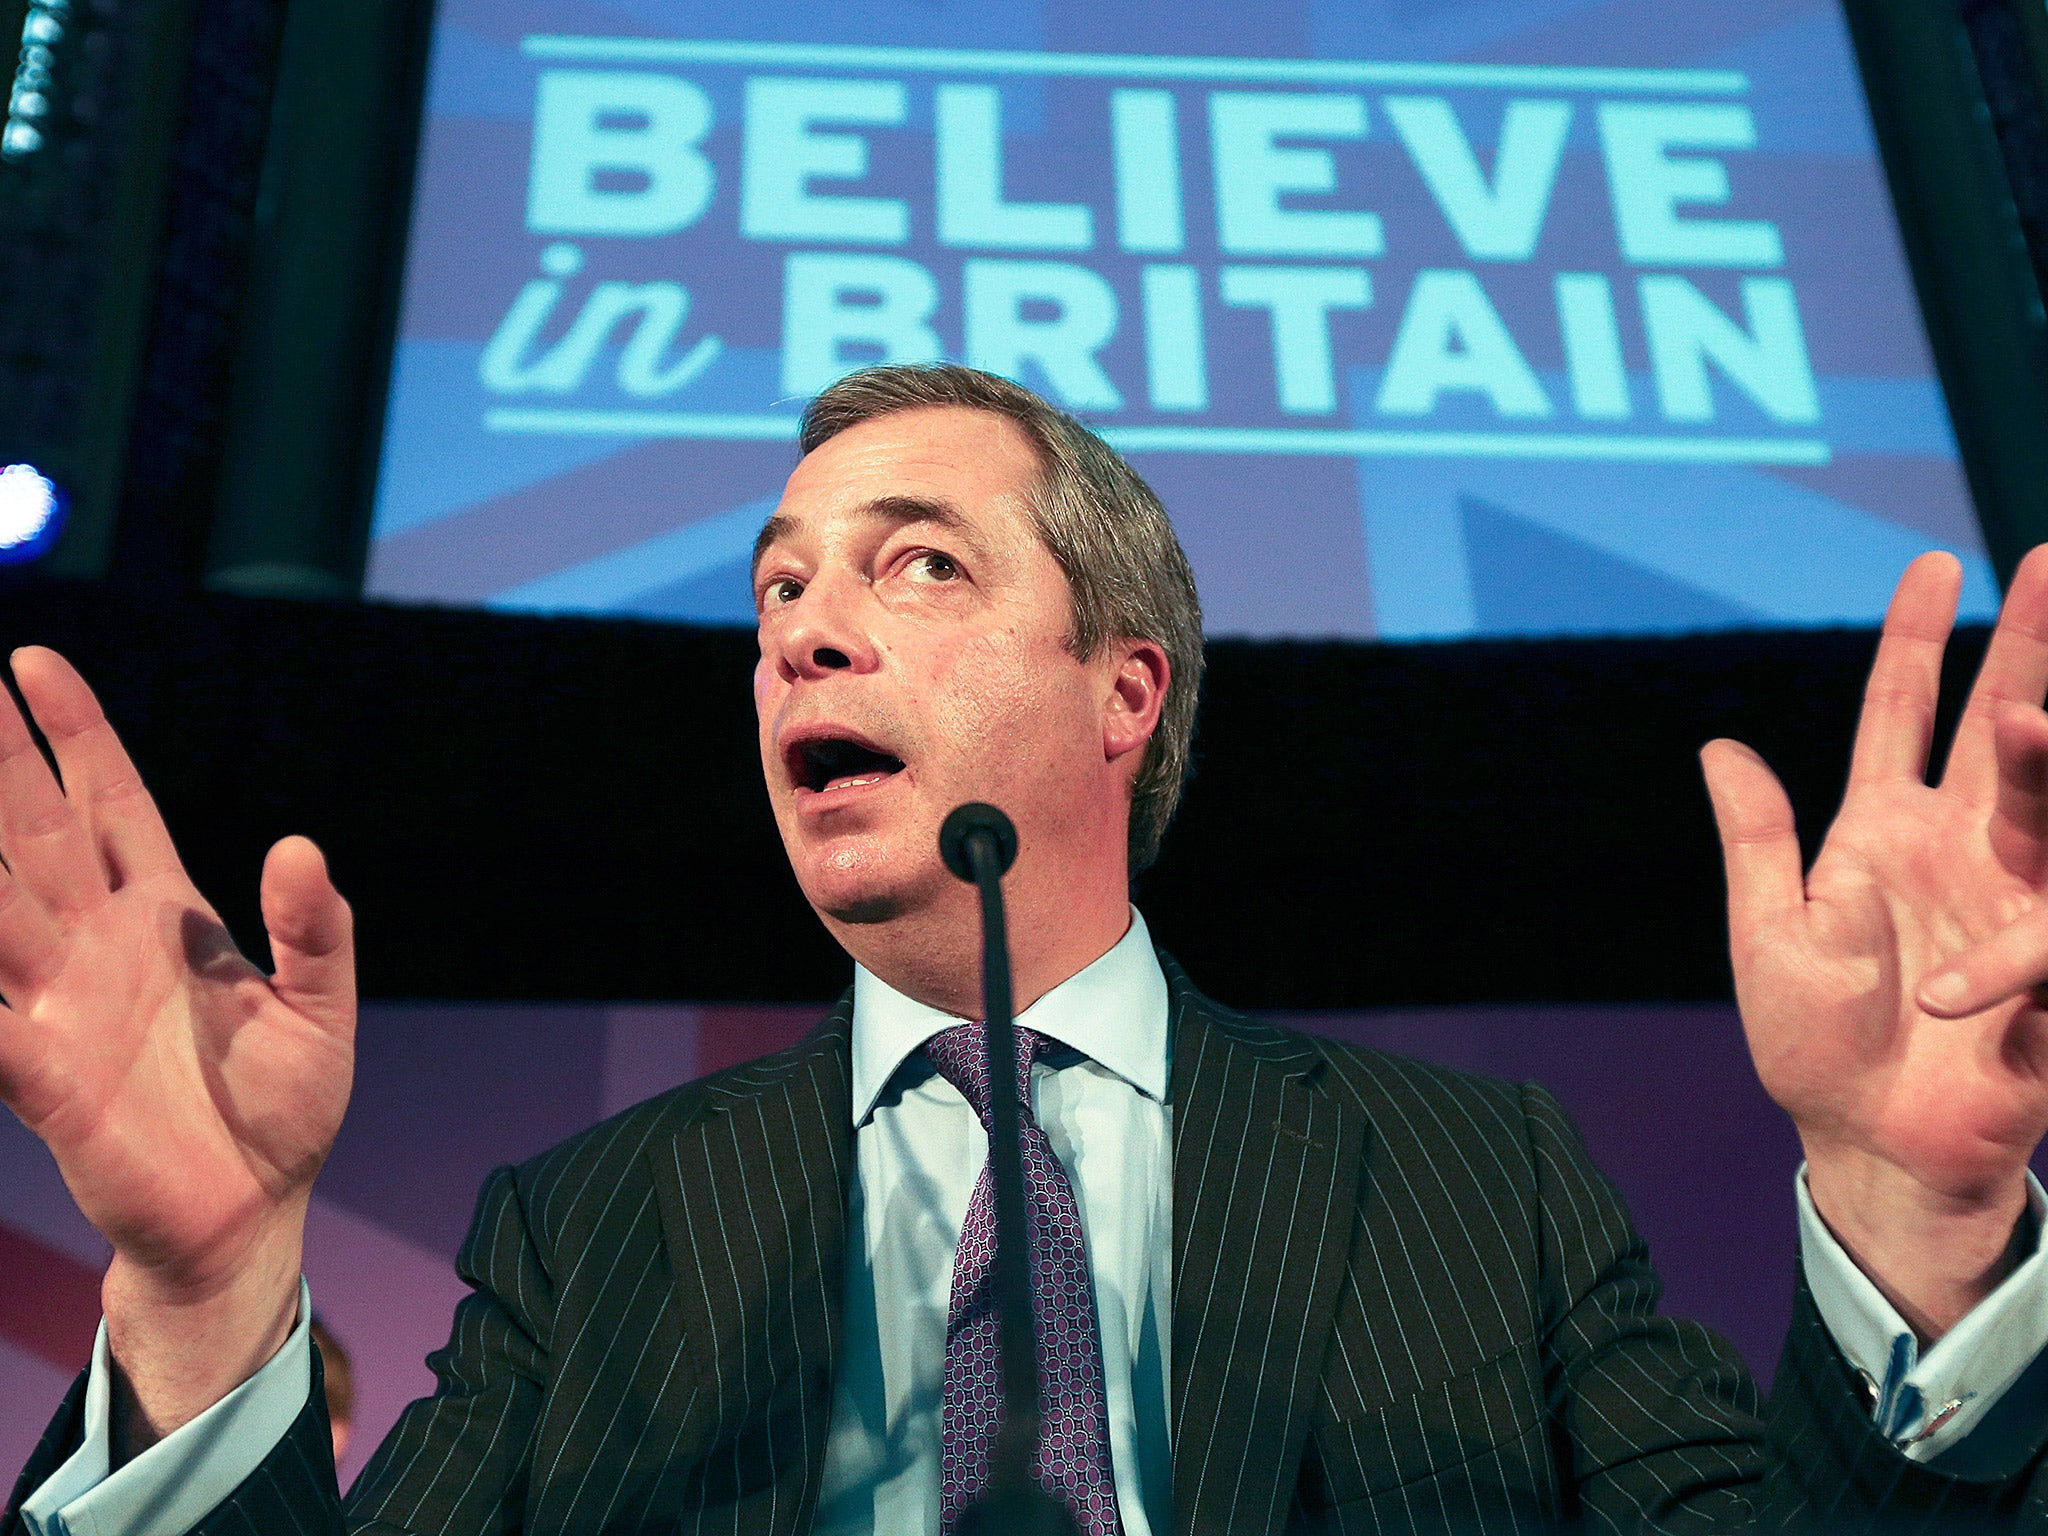 Ukip will 'lead the charge' for an Out vote, Farage will say